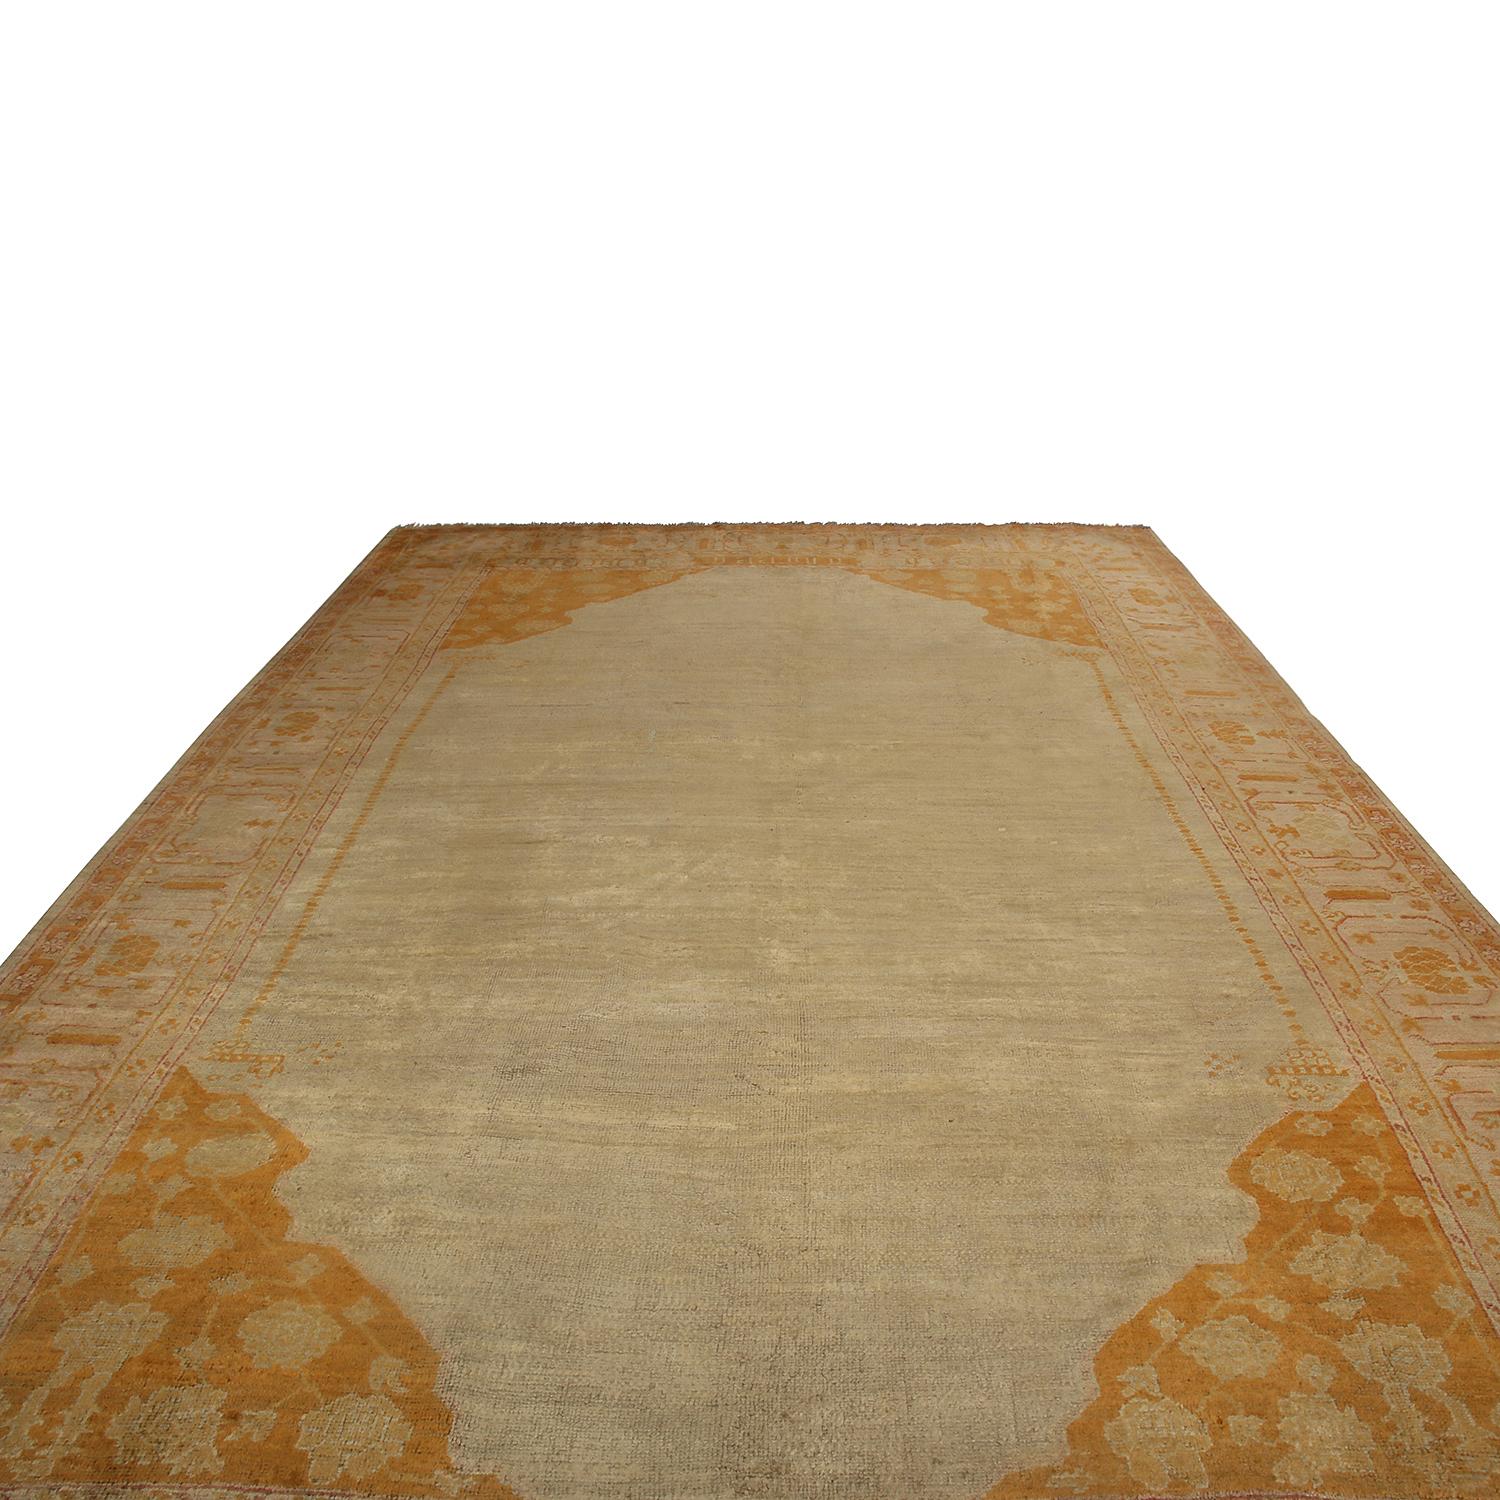 Hand knotted in Turkey originating between 1870-1880, this antique Oushak rug enjoys a subtle, luminous sheen to its quality wool body, accenting the rich autumnal gold, beige and burgundy colorways further complementing the very soothing